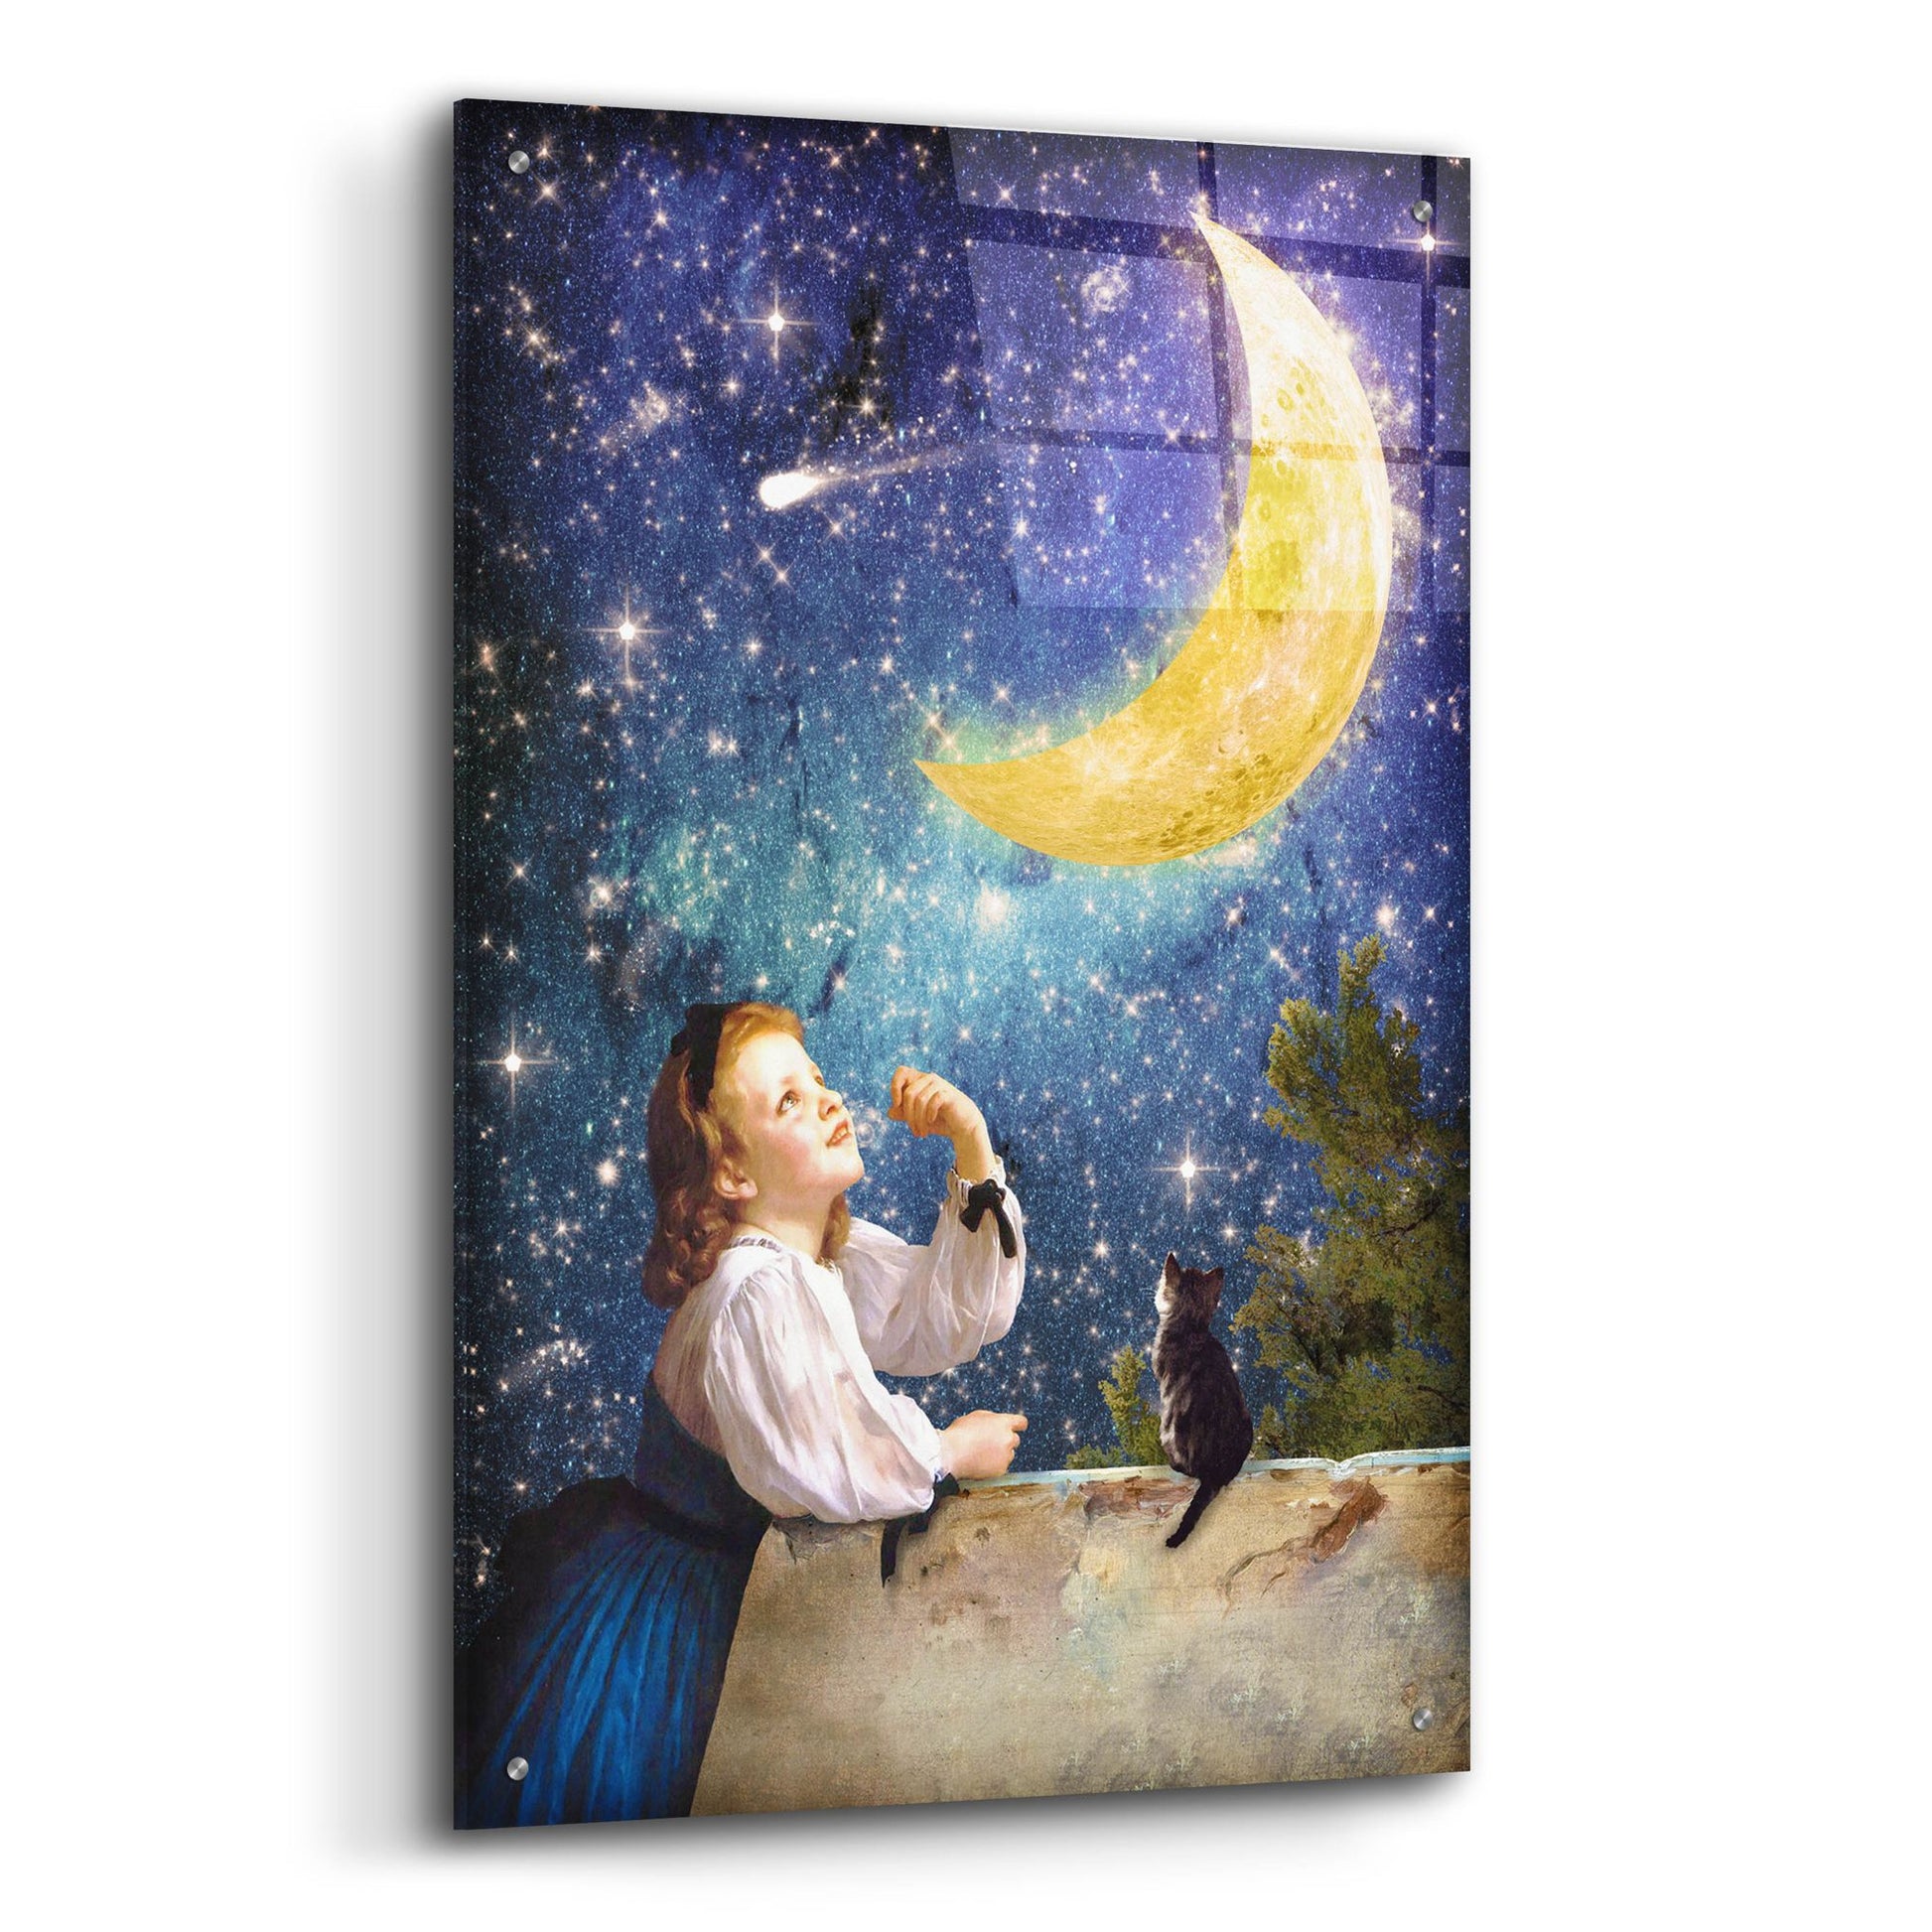 Epic Art 'One Wish Upon the Moon' by Diogo Verissimo, Acrylic Glass Wall Art,24x36